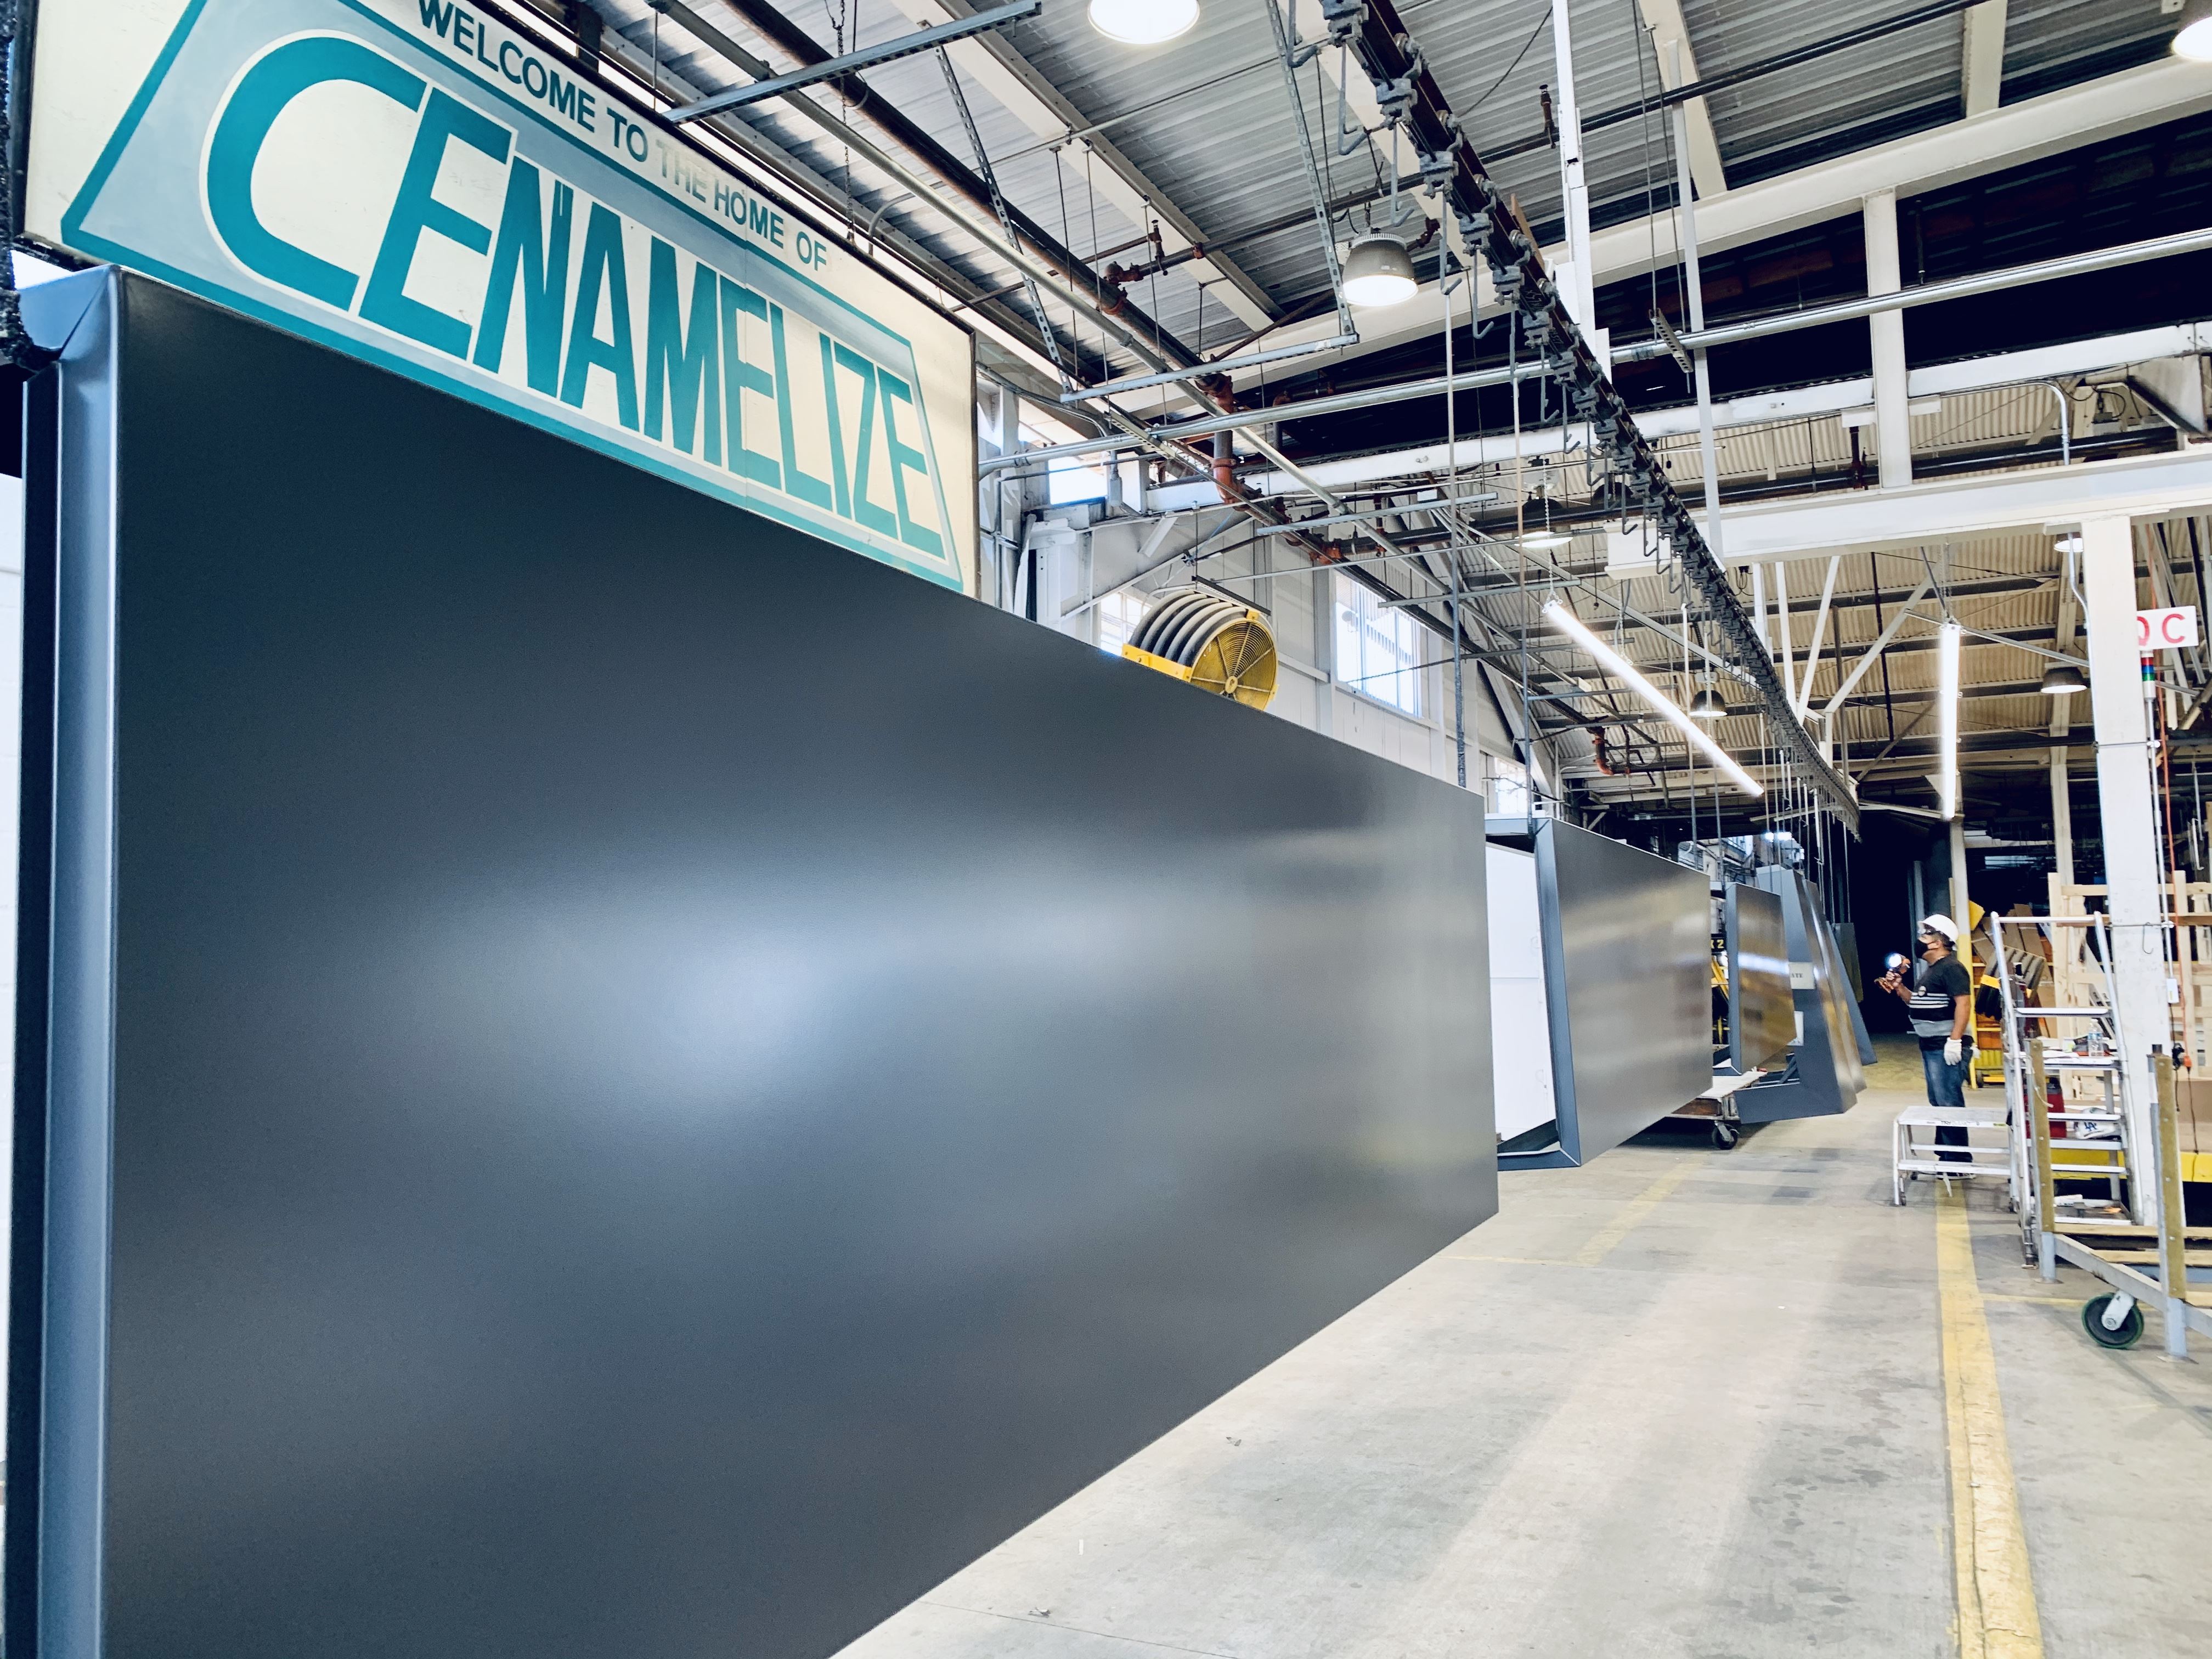 The interior of the Certified Enameling, Inc. facility with a sign that says, "Welcome to the home of Cenamelize"